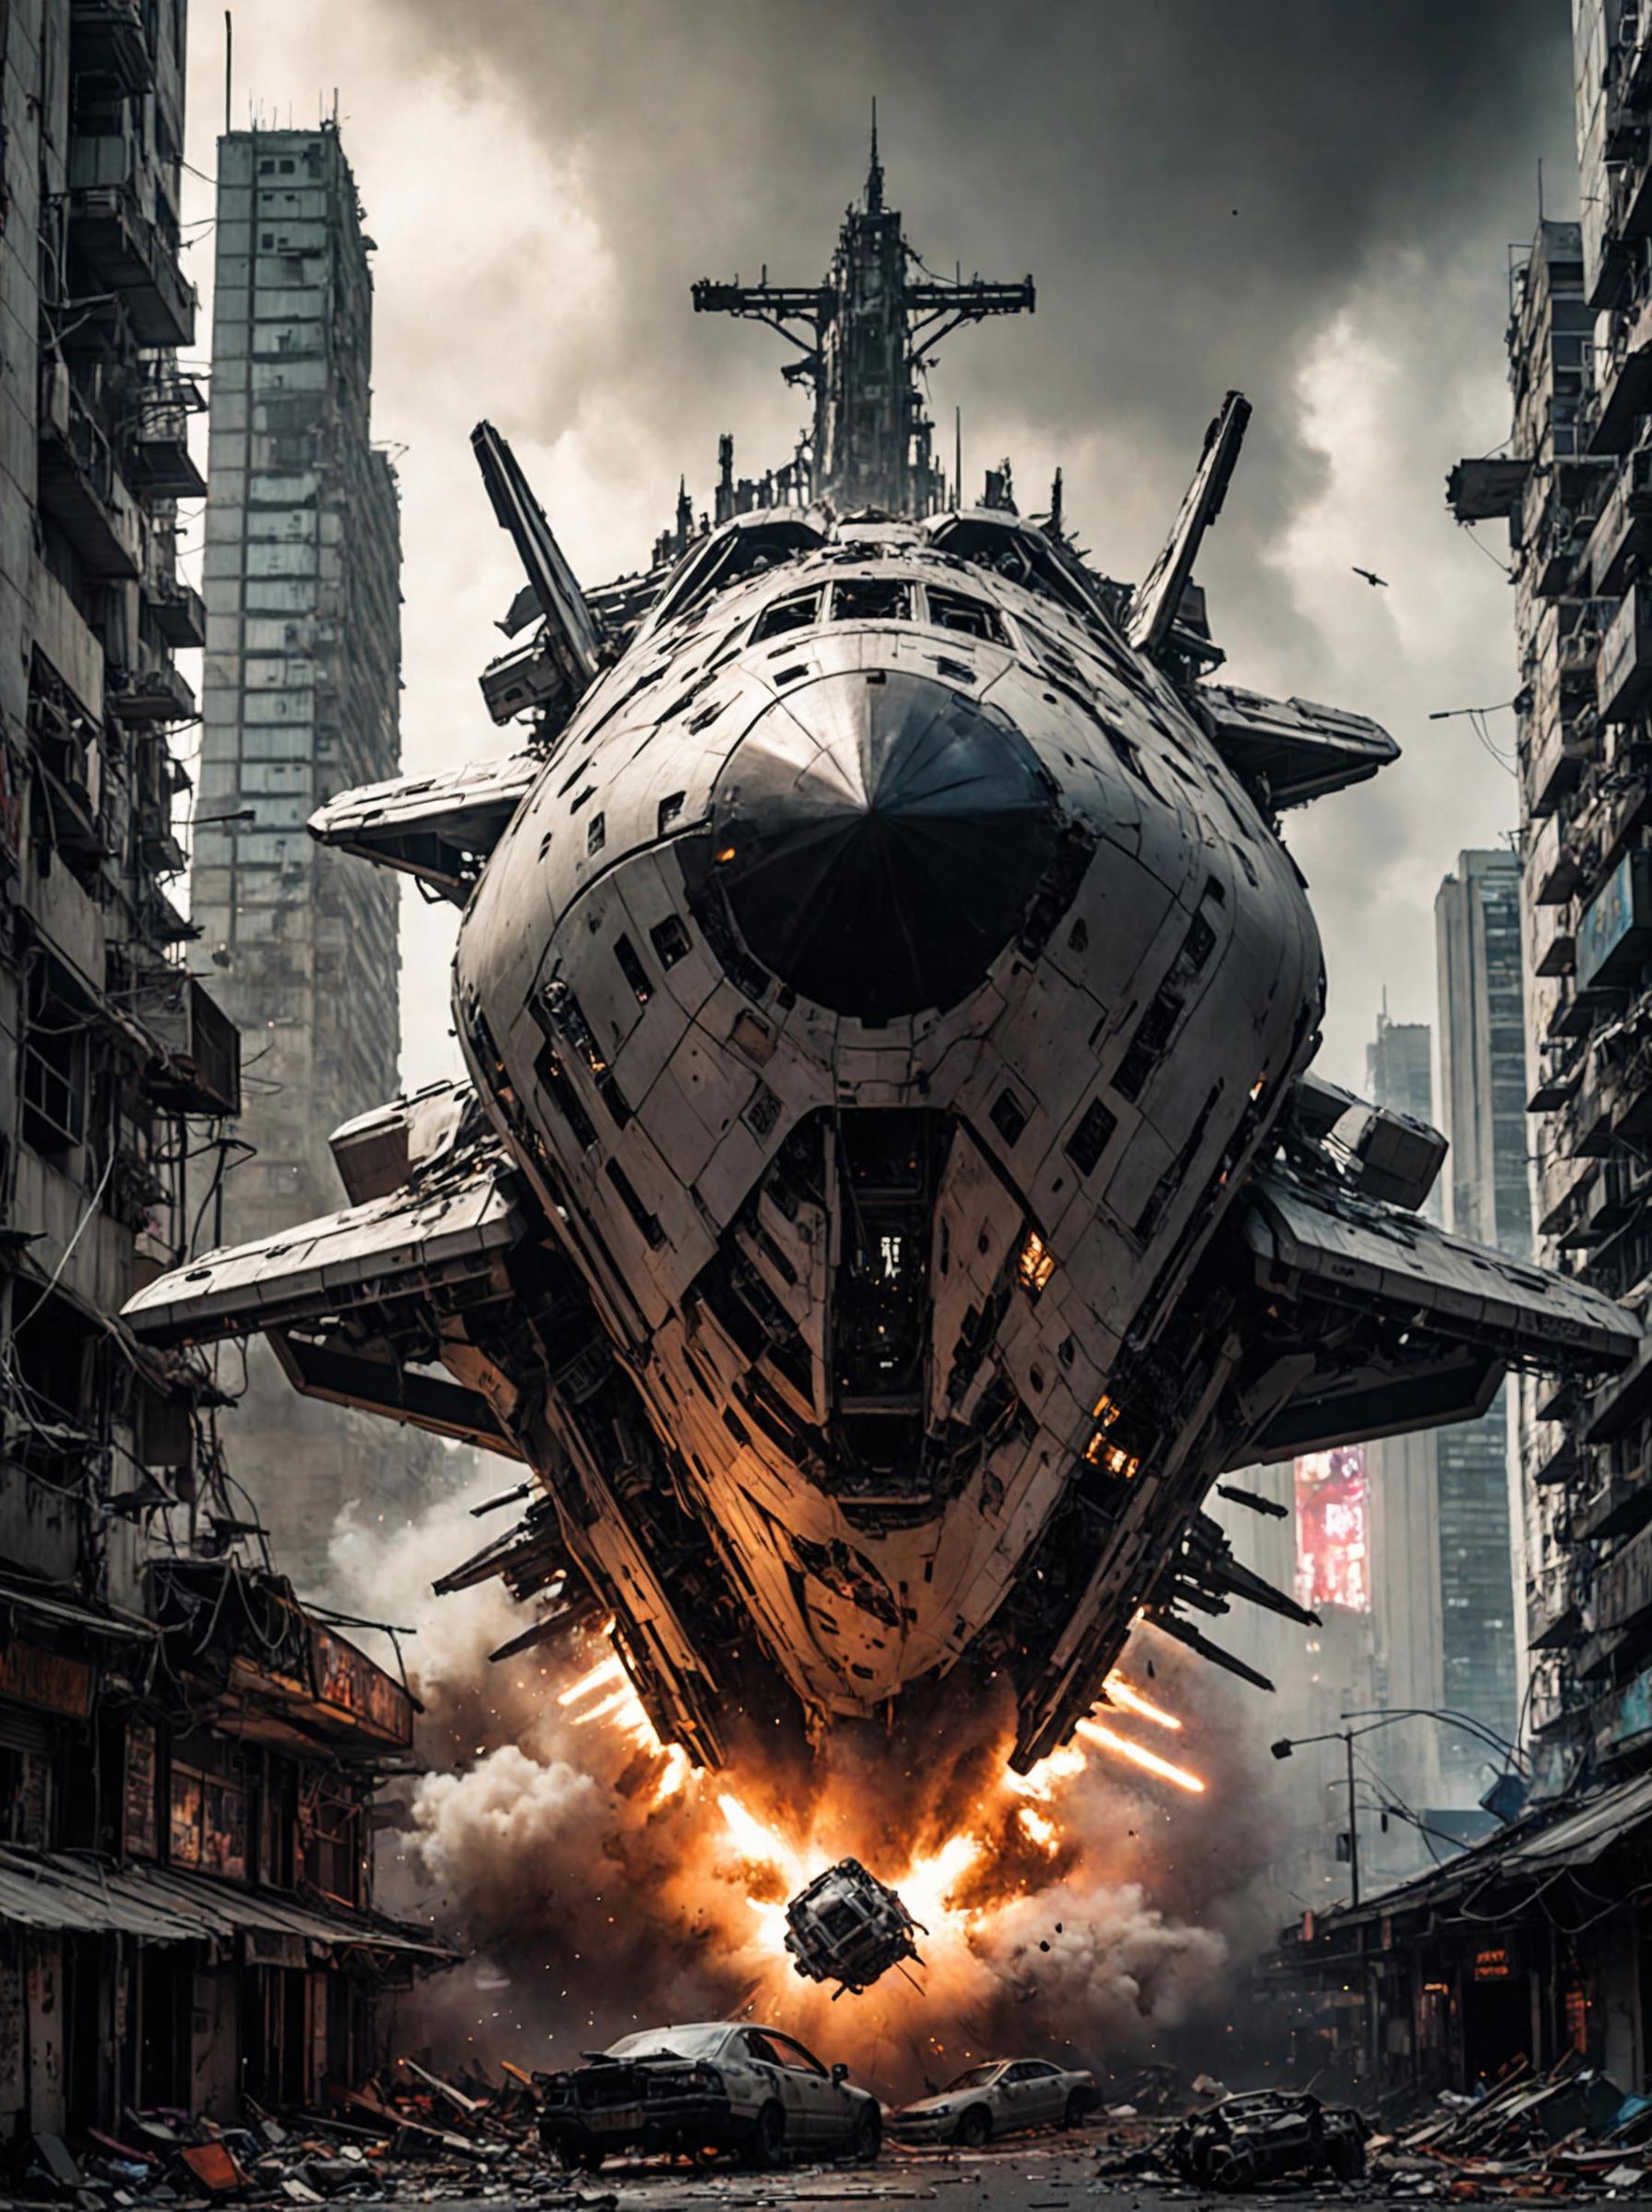 A Space Shuttle Crashes into a City: A dramatic scene of a spaceship crashing into a cityscape, surrounded by tall buildings.